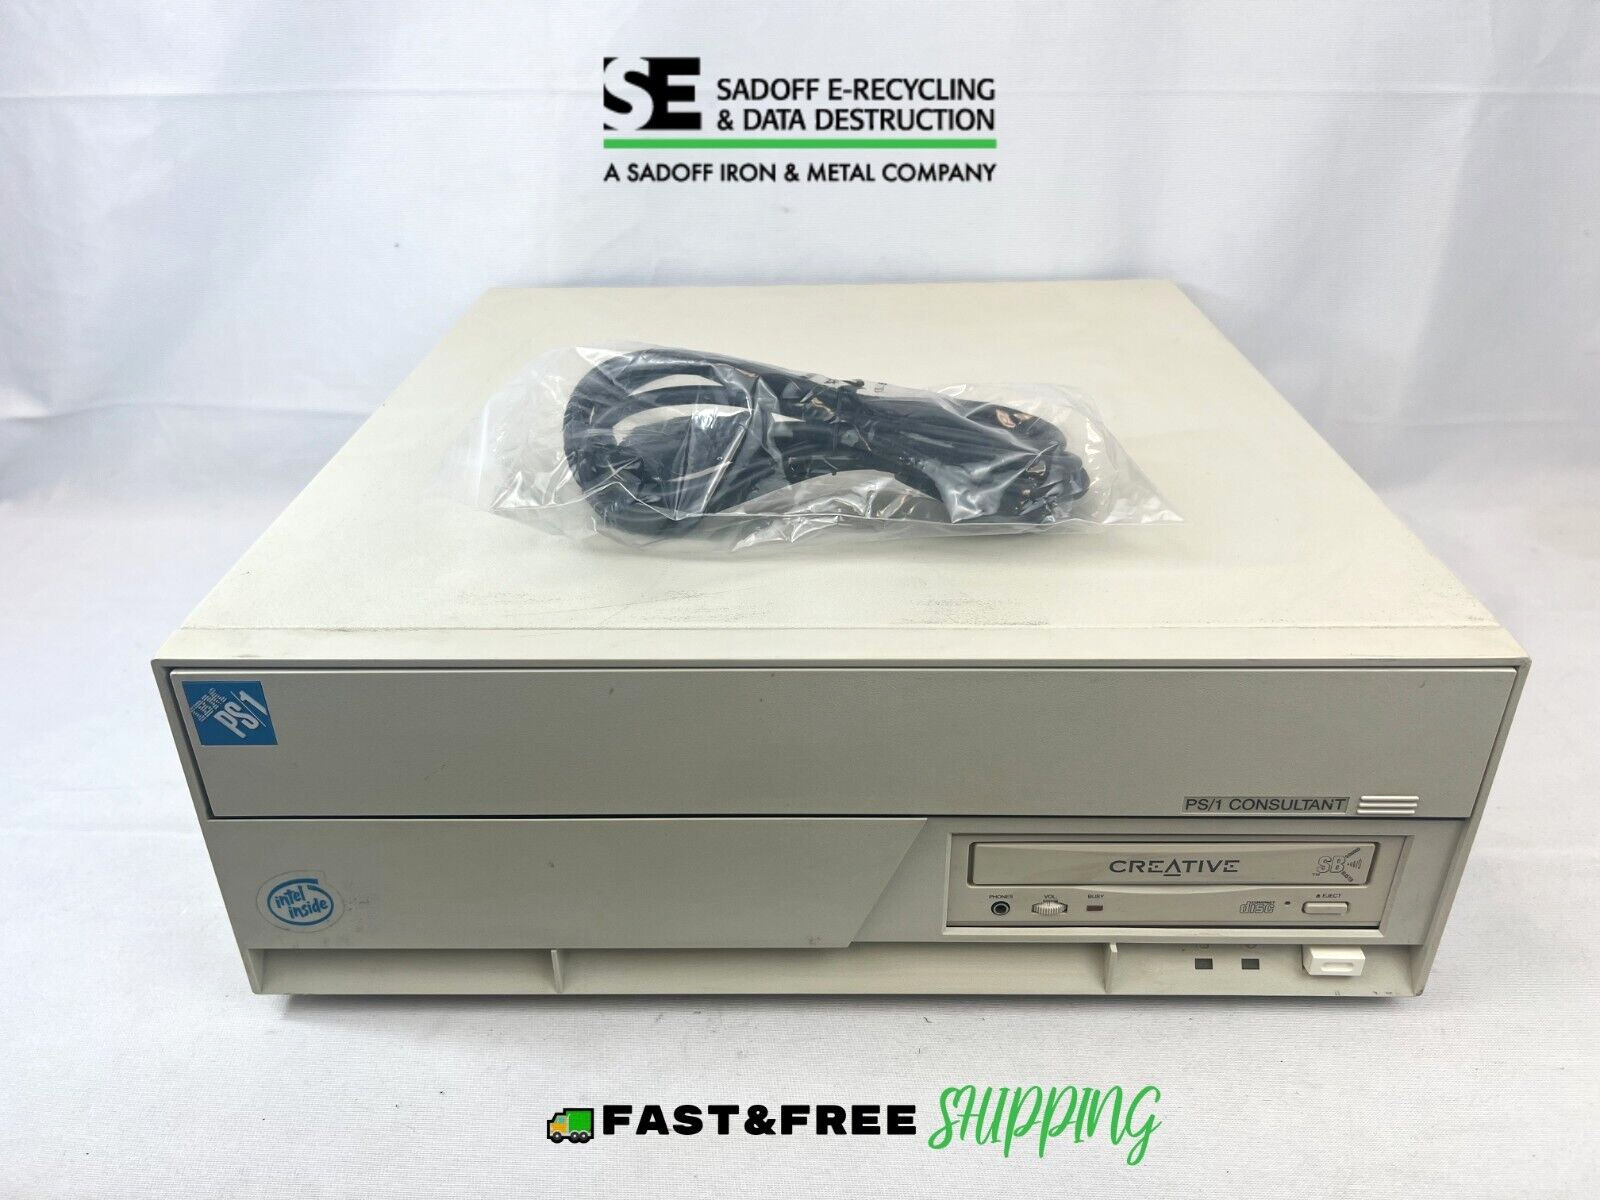 (W) IBM PS/1 CONSULTANT 486SX 33MHZ 2155A-24C - No HDD & CPU [VINTAGE]